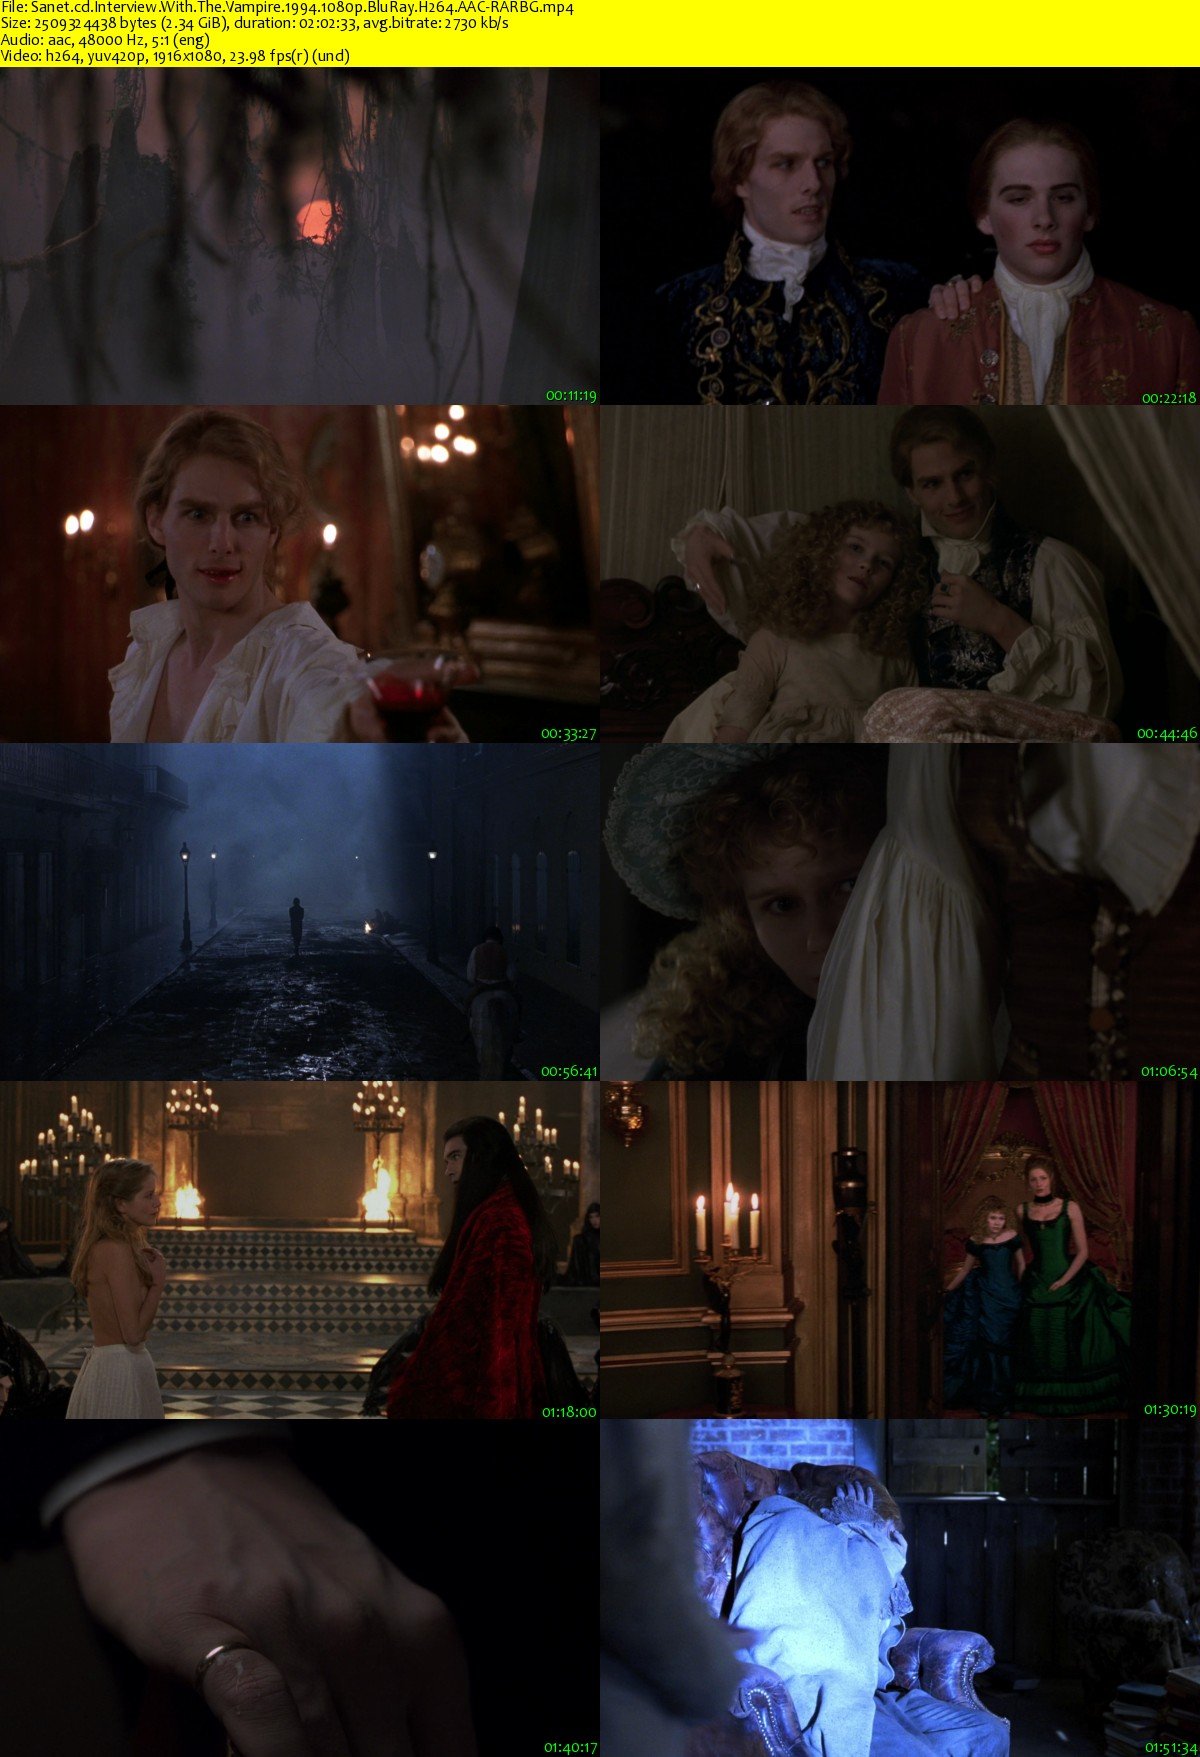 Interview with the Vampire The Vampire Chronicles 1994